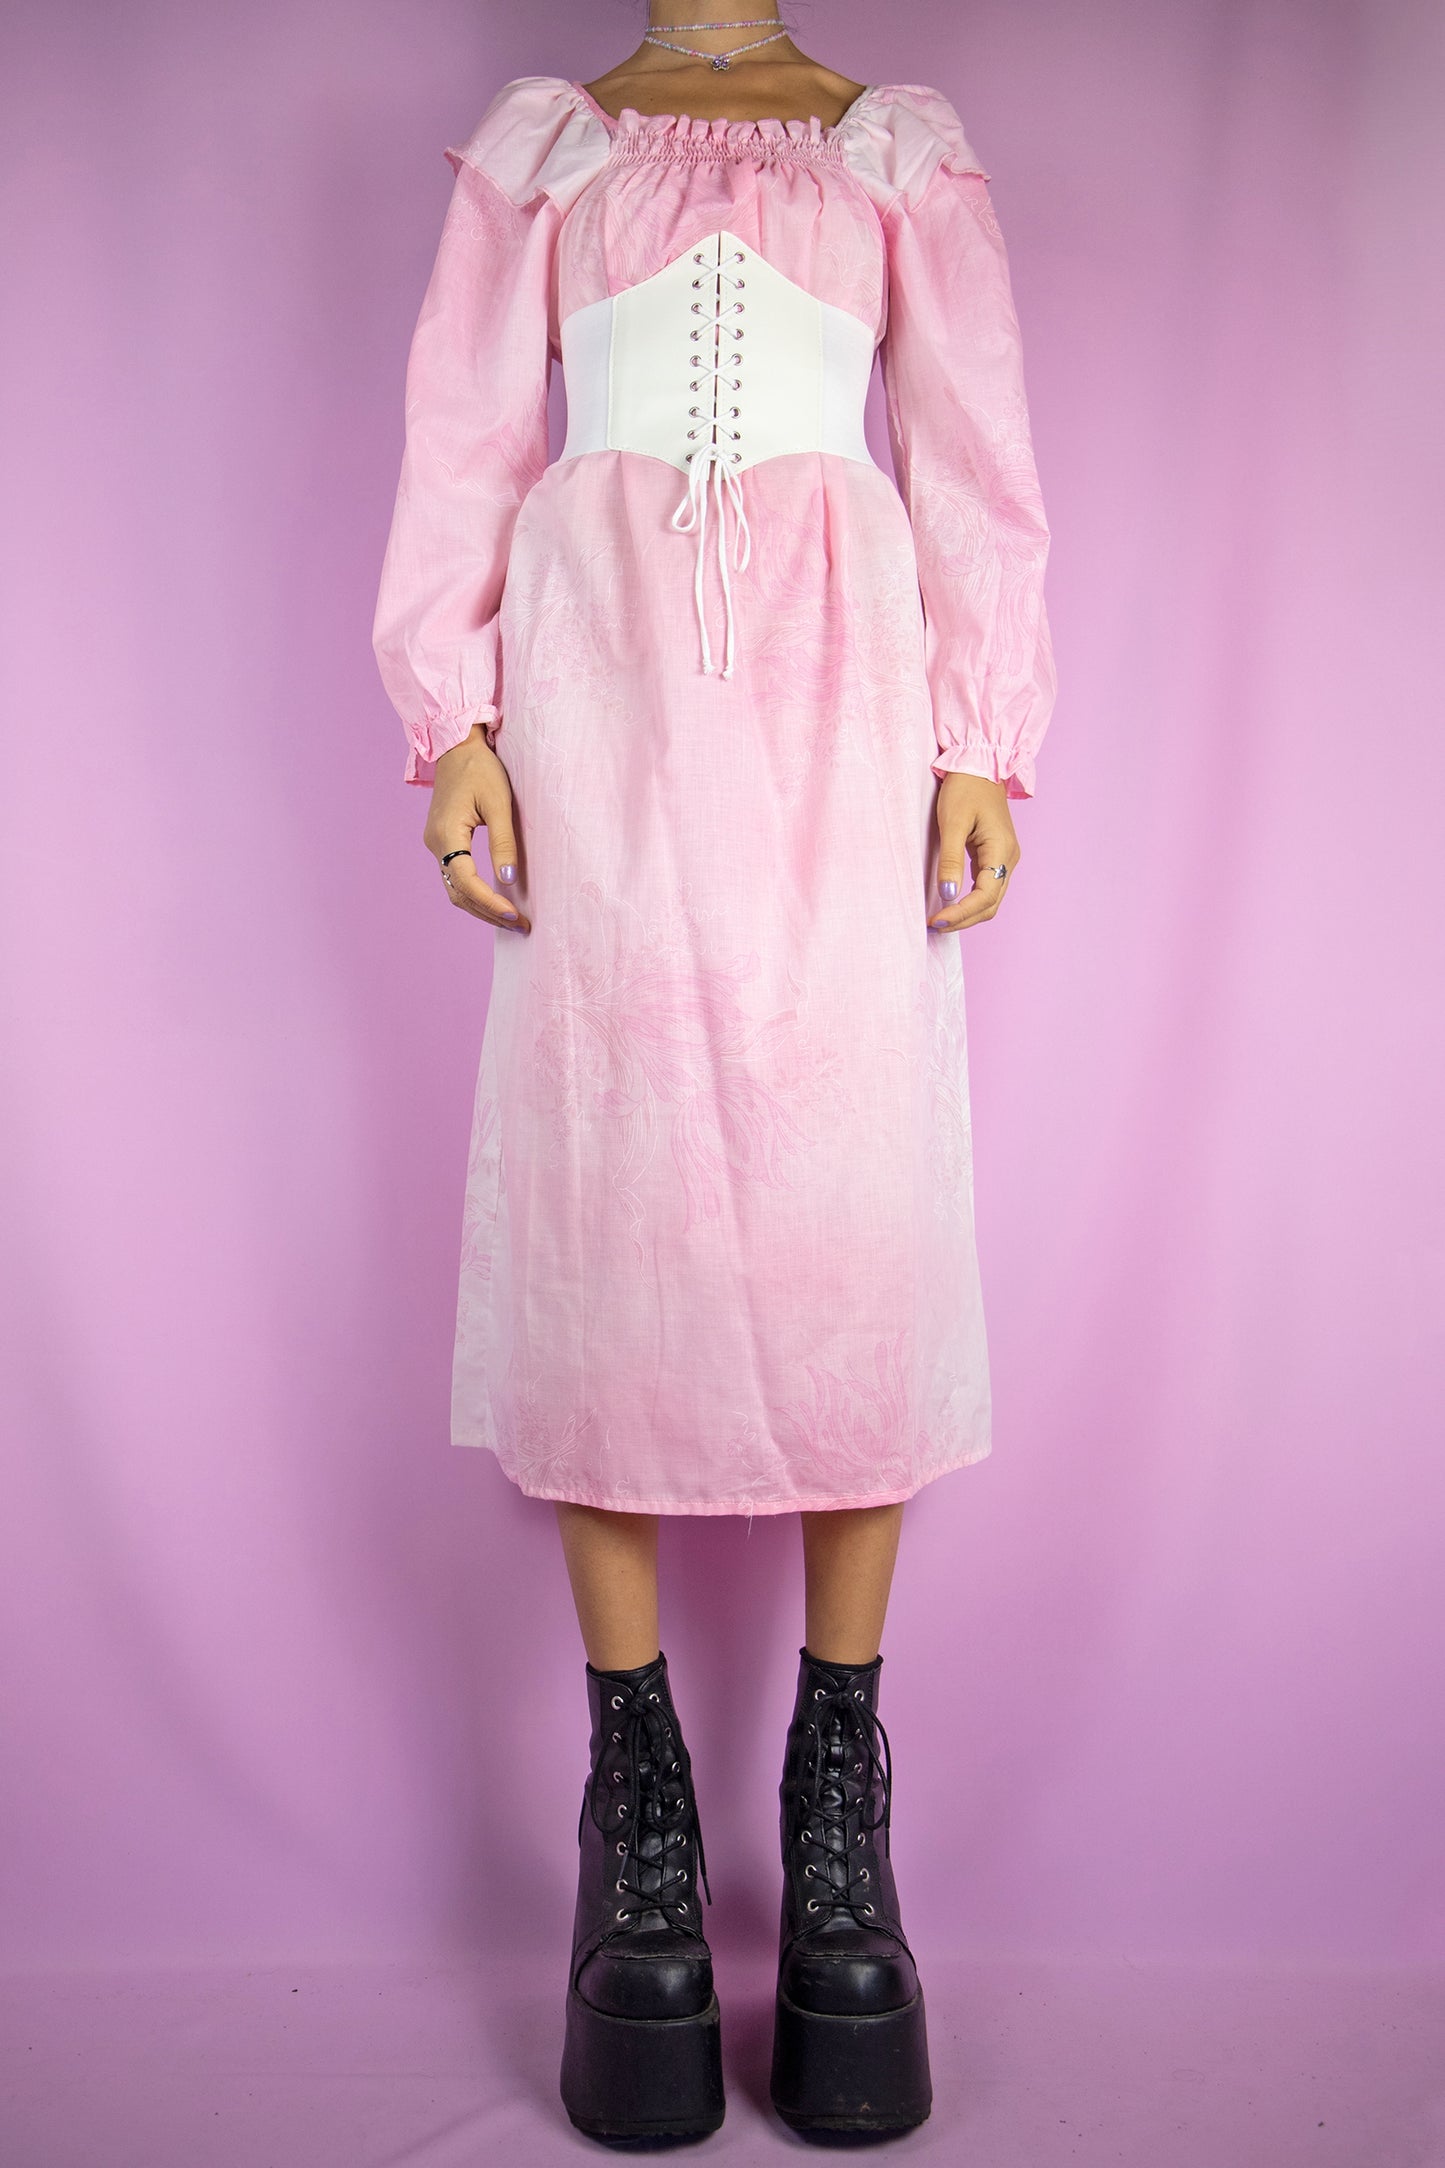 The Vintage 80s Pink Long Sleeve Nightgown Dress is a pastel light pink floral long sleeve midi dress with ruched front. Gorgeous romantic cottage prairie inspired sleepwear 1980s night dress. The white corset shown in the pictures is not included.